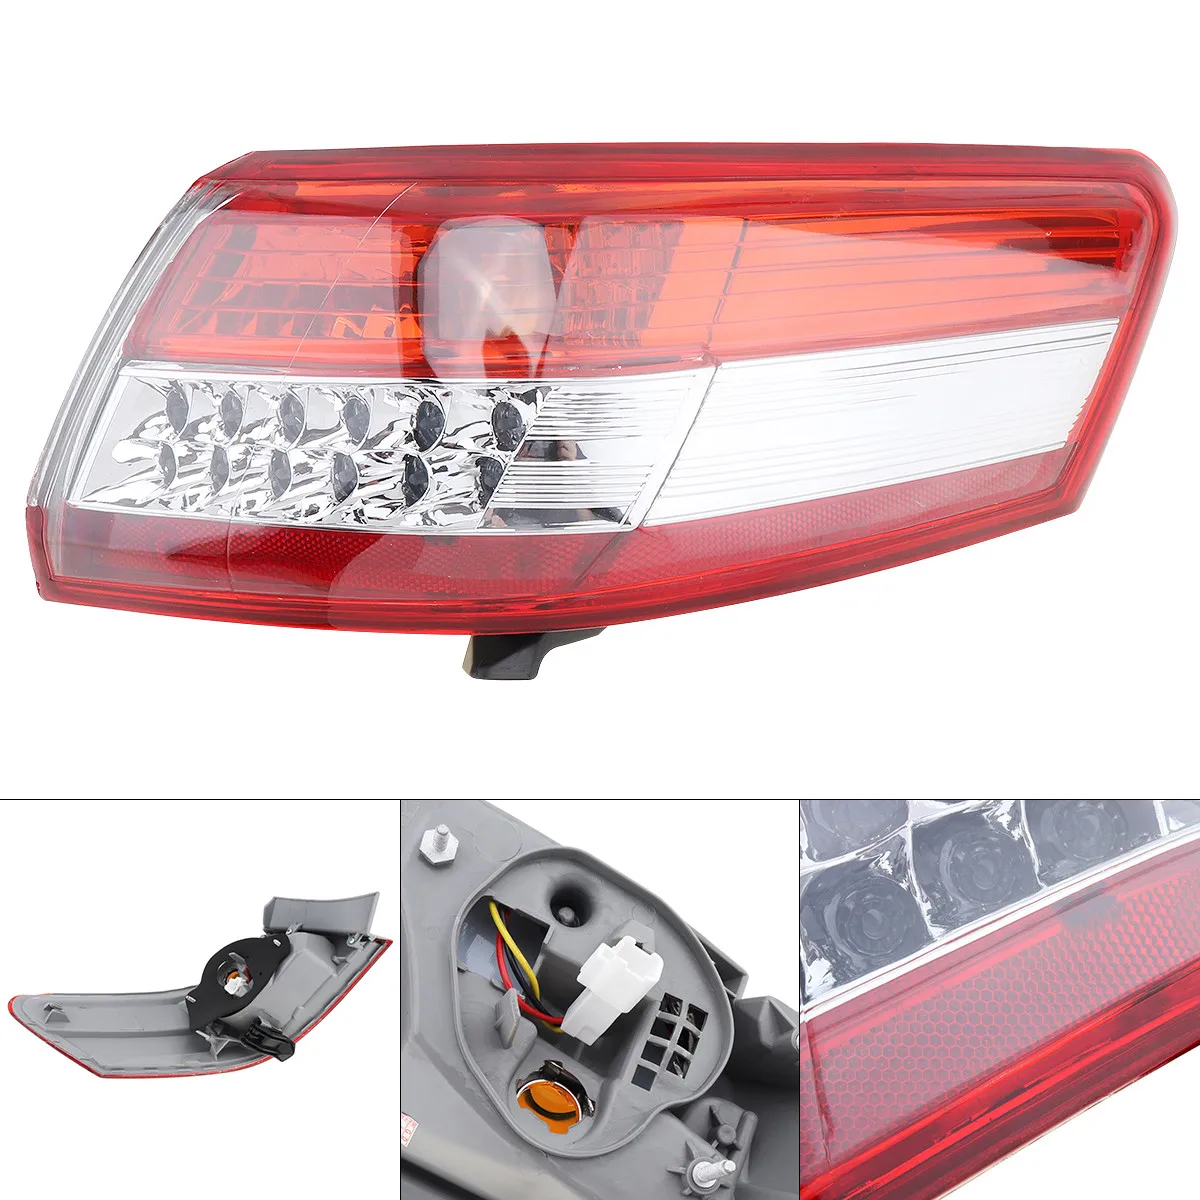 

1pcs Waterproof Durable Auto Car Tail Light Lamp Left / Right Side RH Fit for Toyota Sport Edition ACV40 Camry 2010 2011